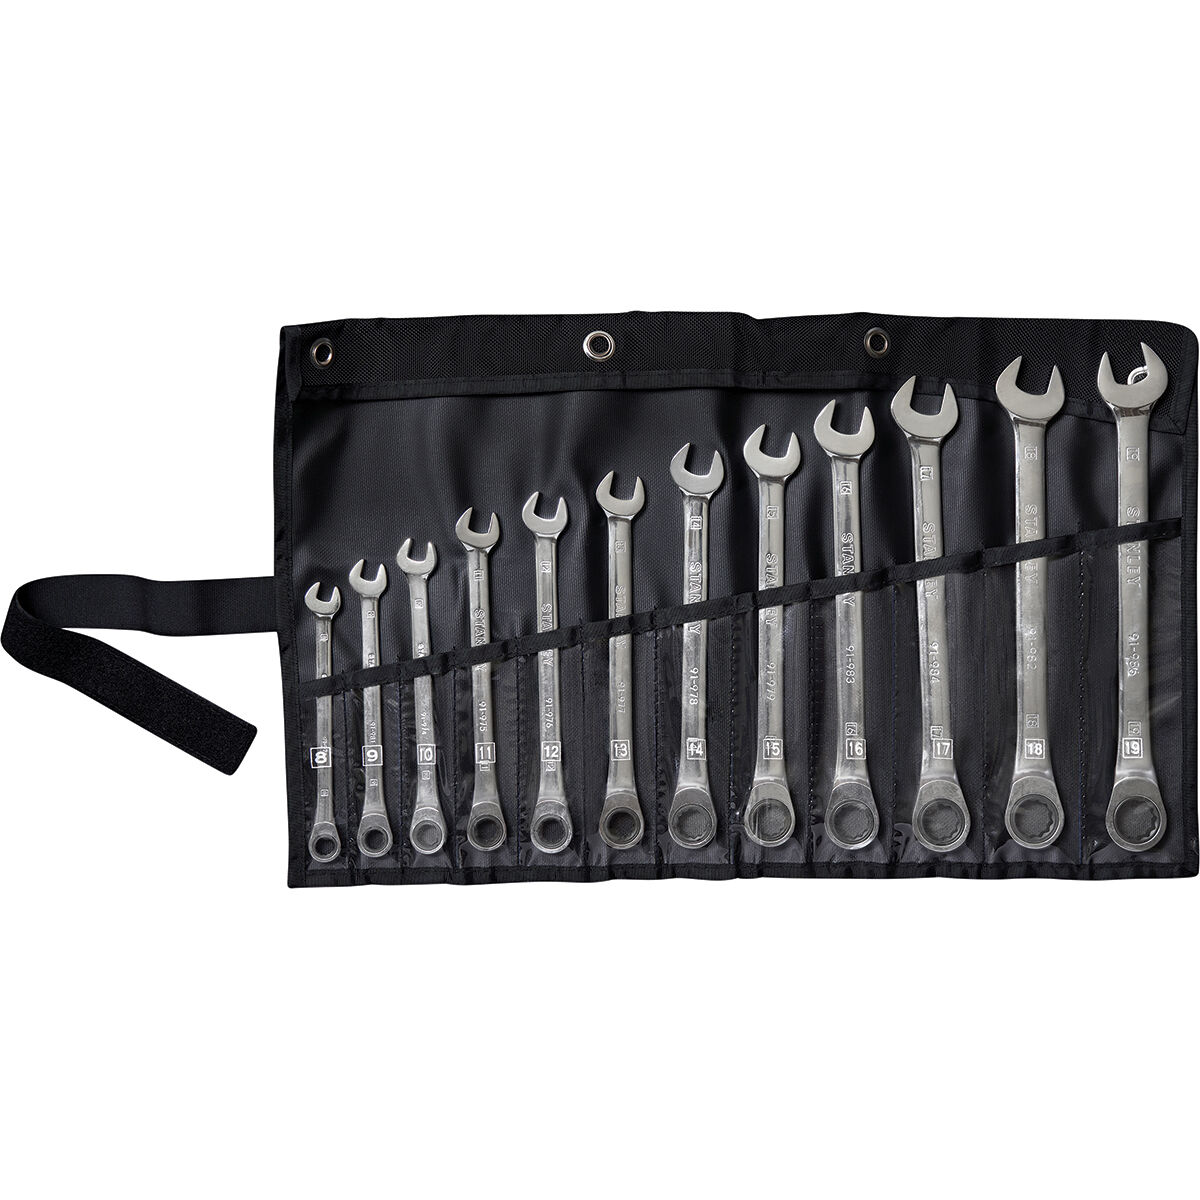 De Neers DN-13/12M 13/12M Ring Spanner Shallow Offset 6x7 - 30x32MM(12 Pcs  Set)Wrench Set/Spanner Set Tools kit/Set of 12 Piece/Tools kit for Home  use. - Professional Spanners Double Sided Box End Wrench